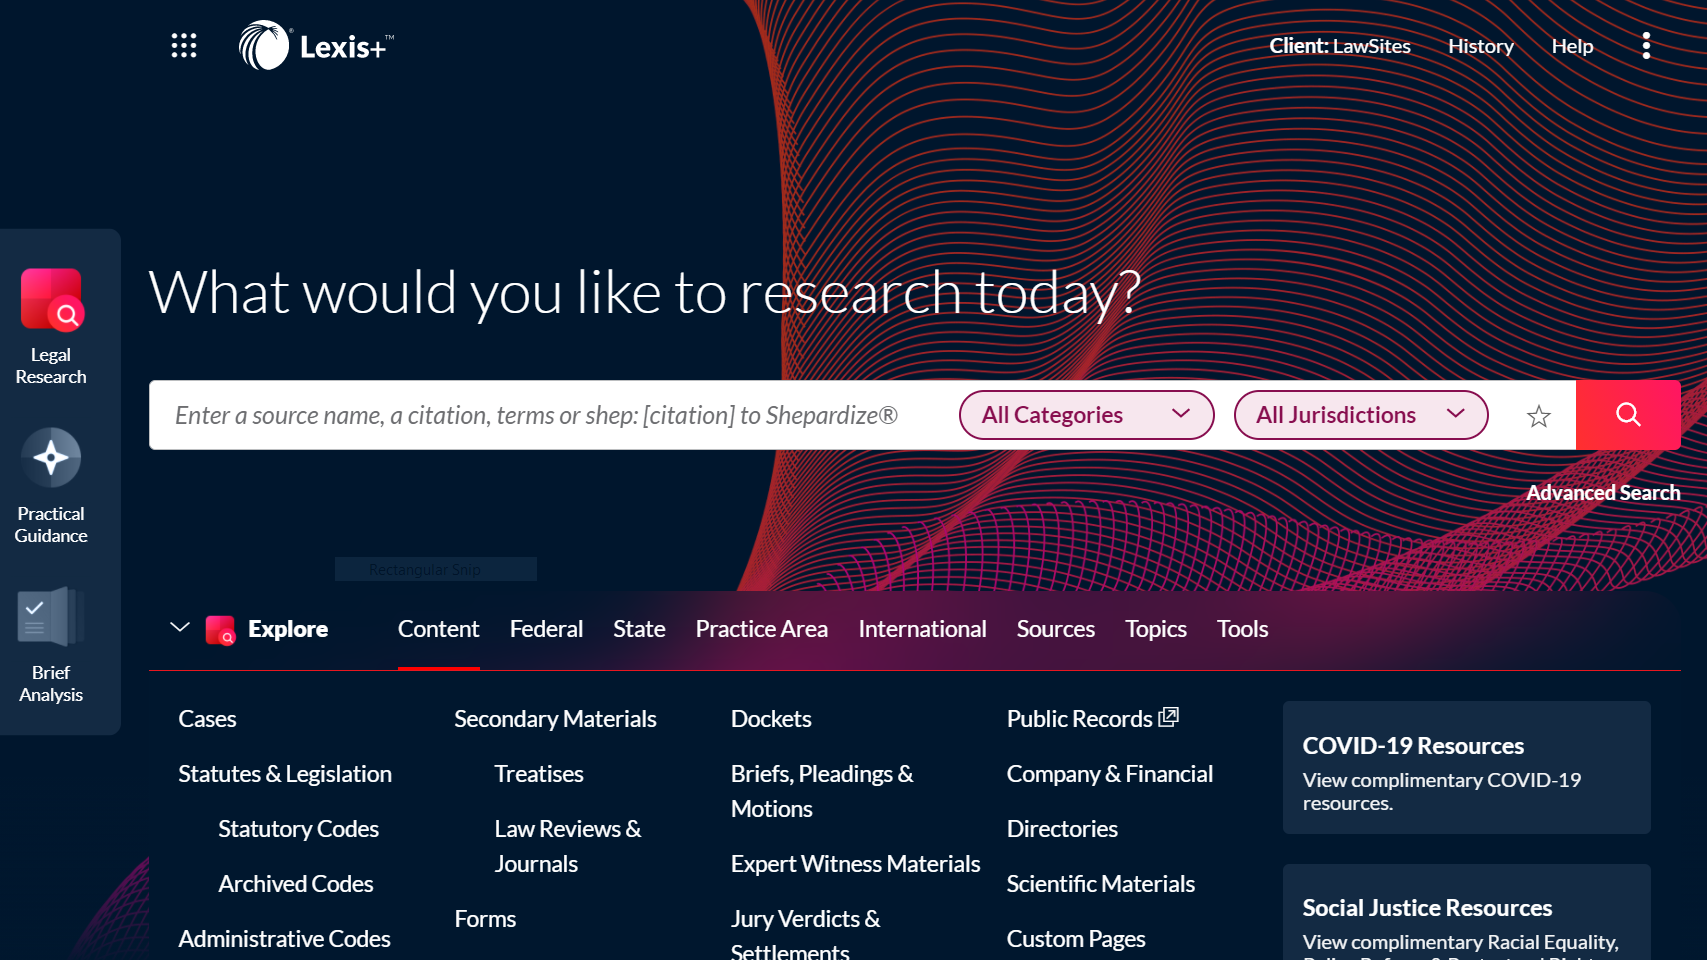 Hands On with Lexis+, New Premium Research Service from LexisNexis That Officially Launches Today